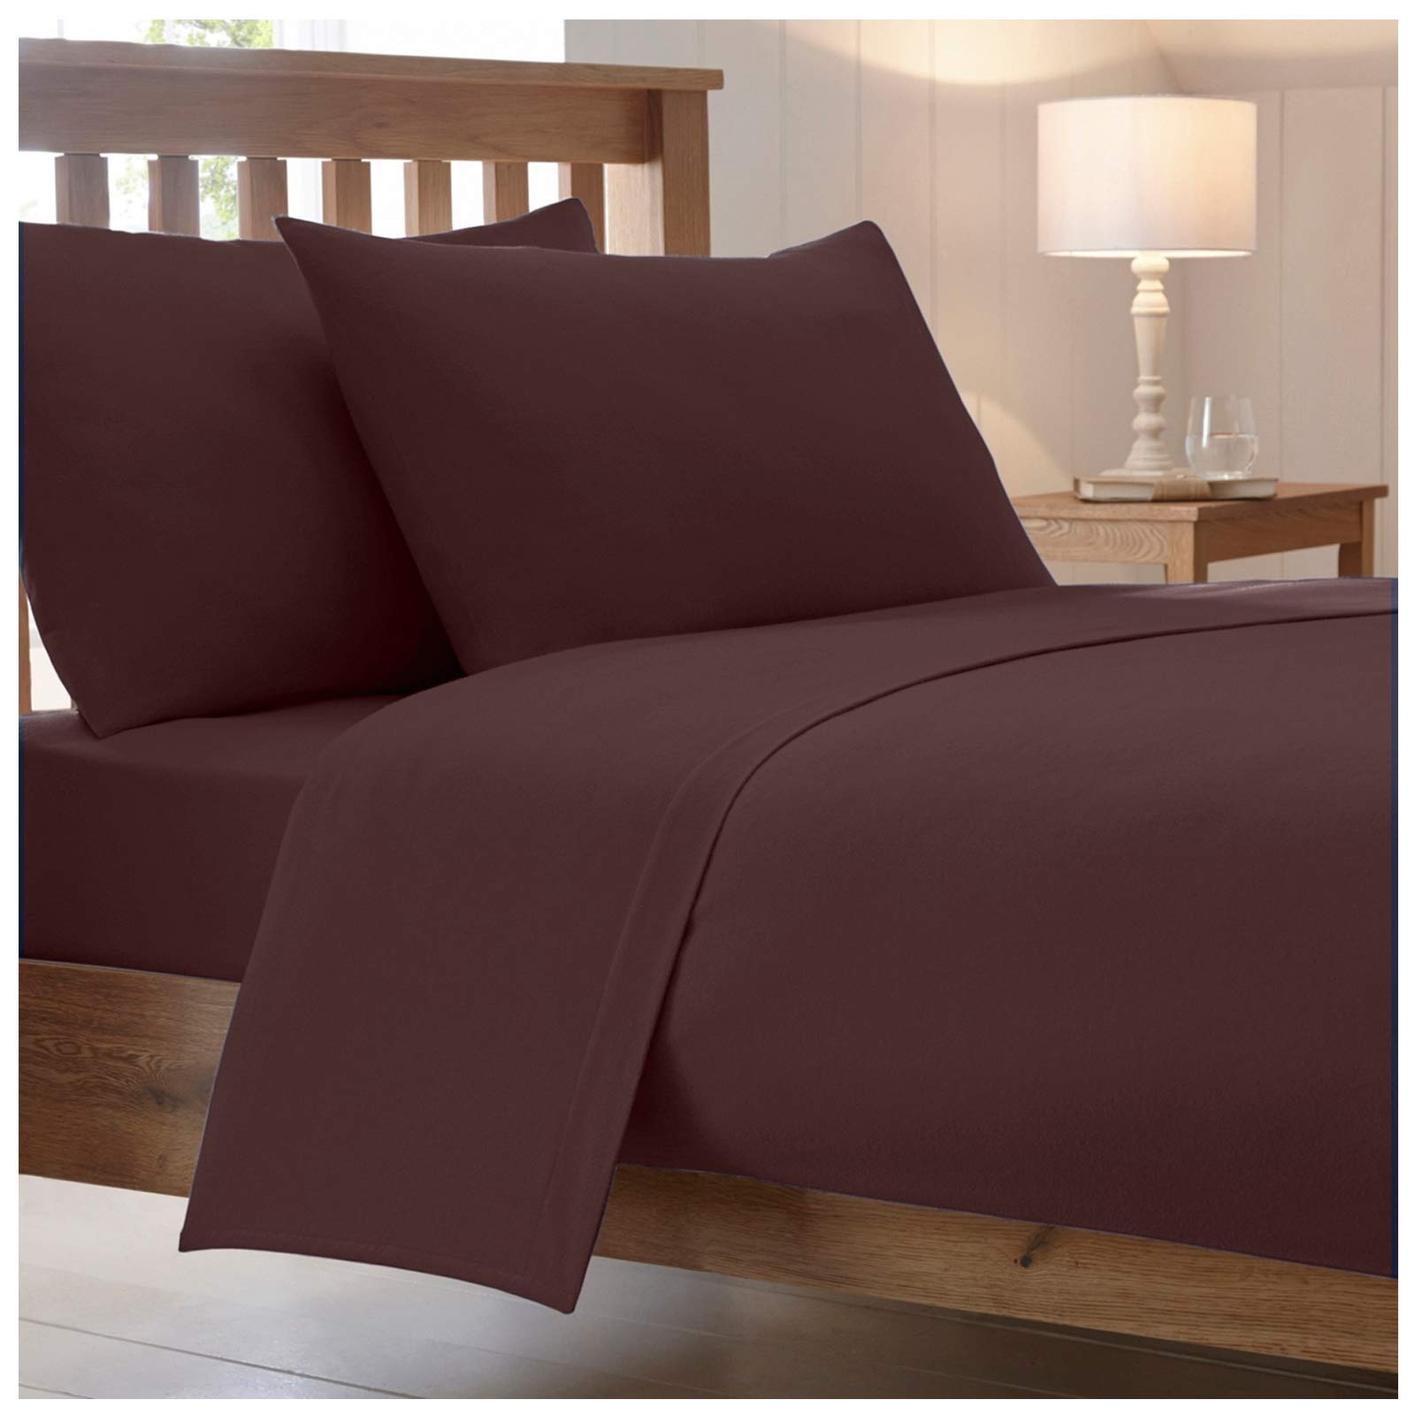 Combed Percale Non-Iron Sheeting, Chocolate